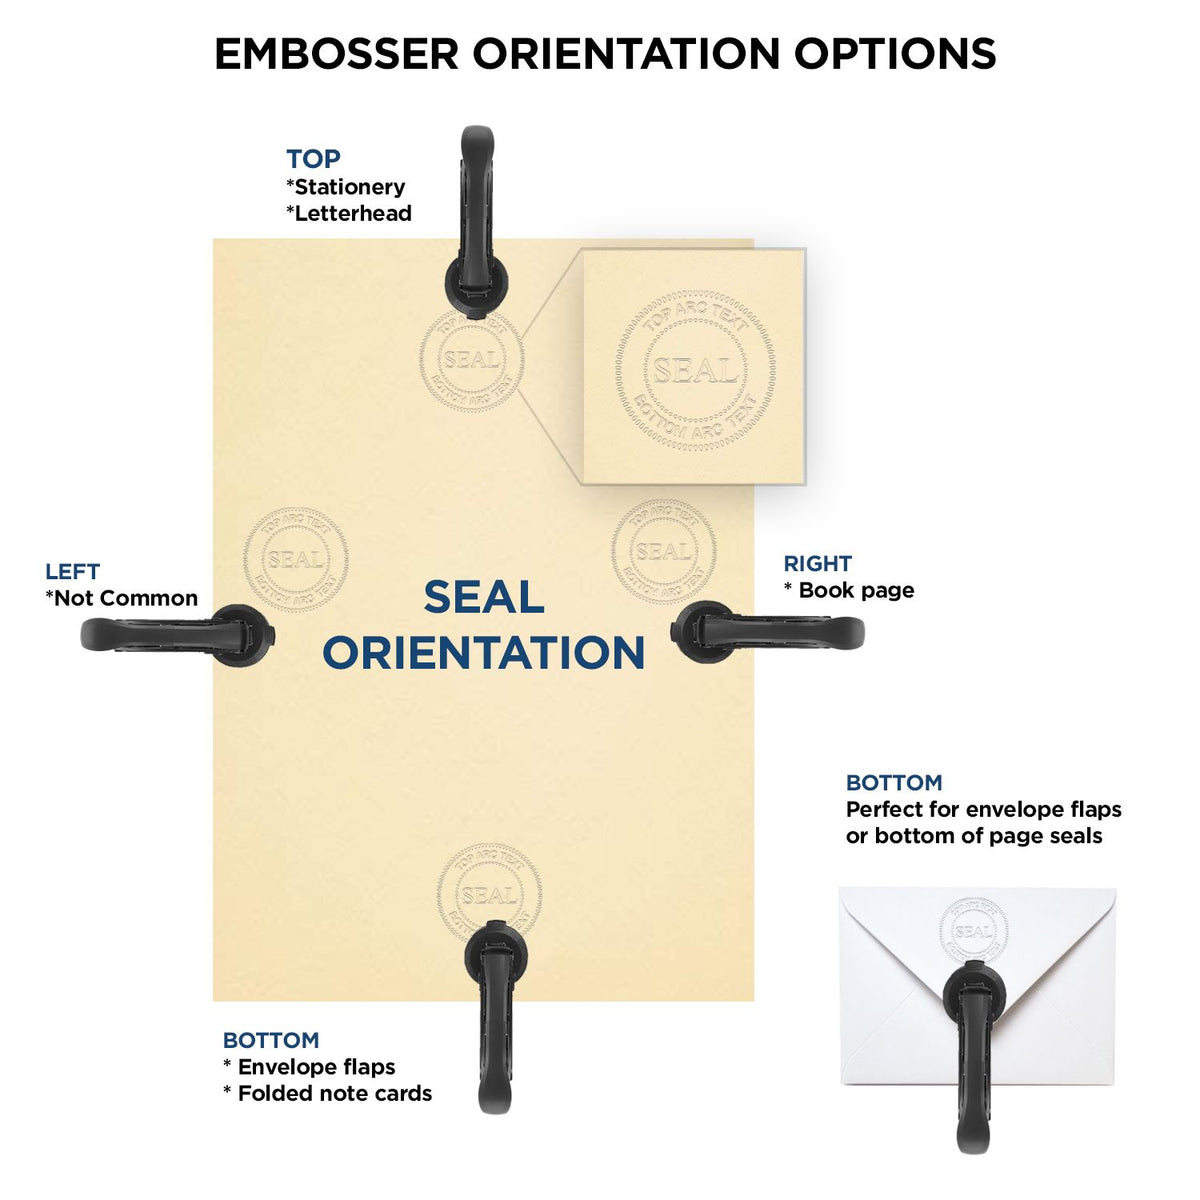 An infographic for the Heavy Duty Cast Iron Michigan Land Surveyor Seal Embosser showing embosser orientation, this is showing examples of a top, bottom, right and left insert.